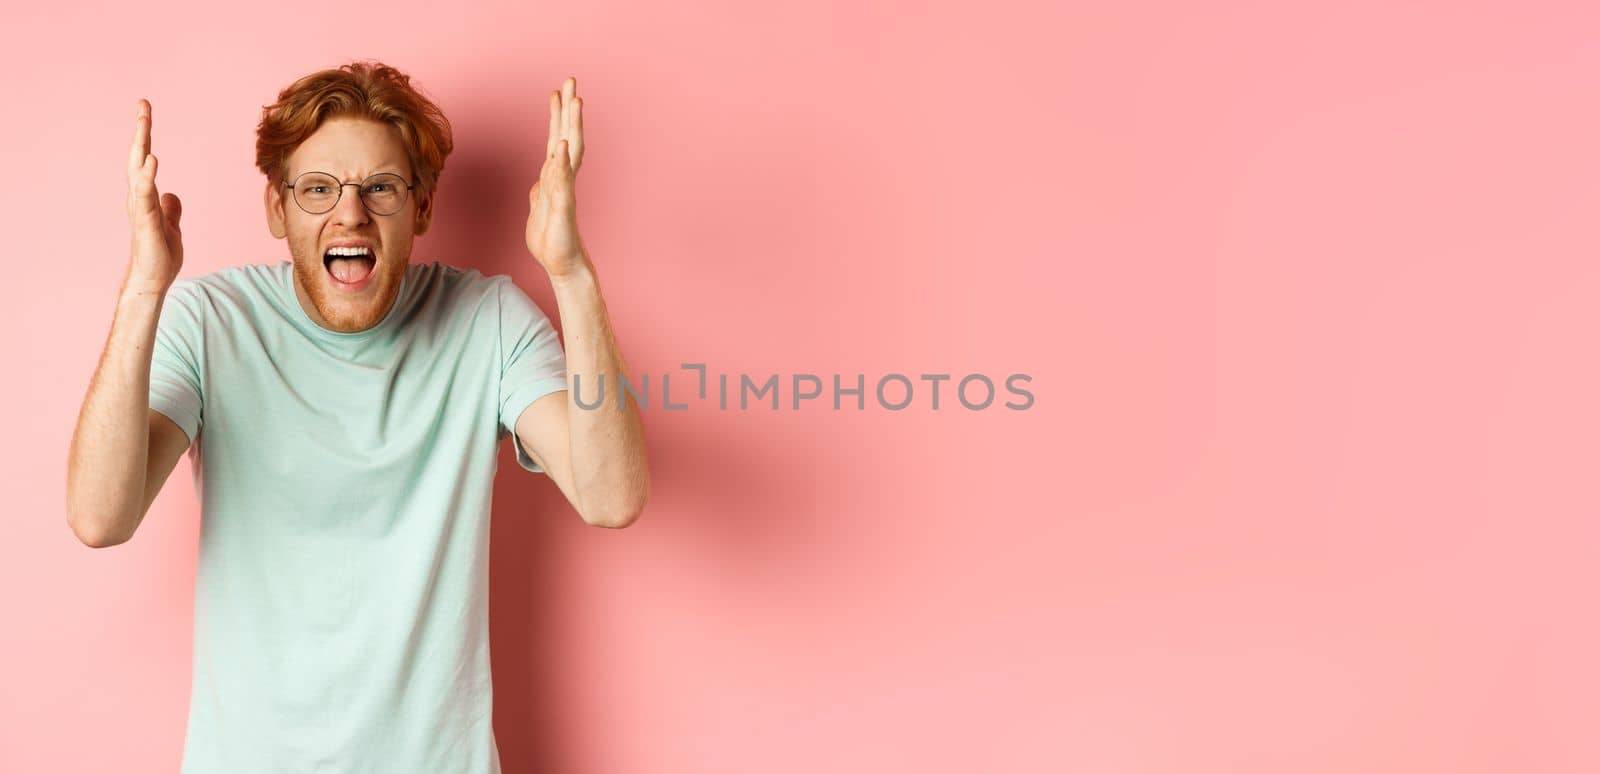 Angry redhead guy in glasses shouting, frowning and shaking hands with frustrated and outraged face, standing over pink background.